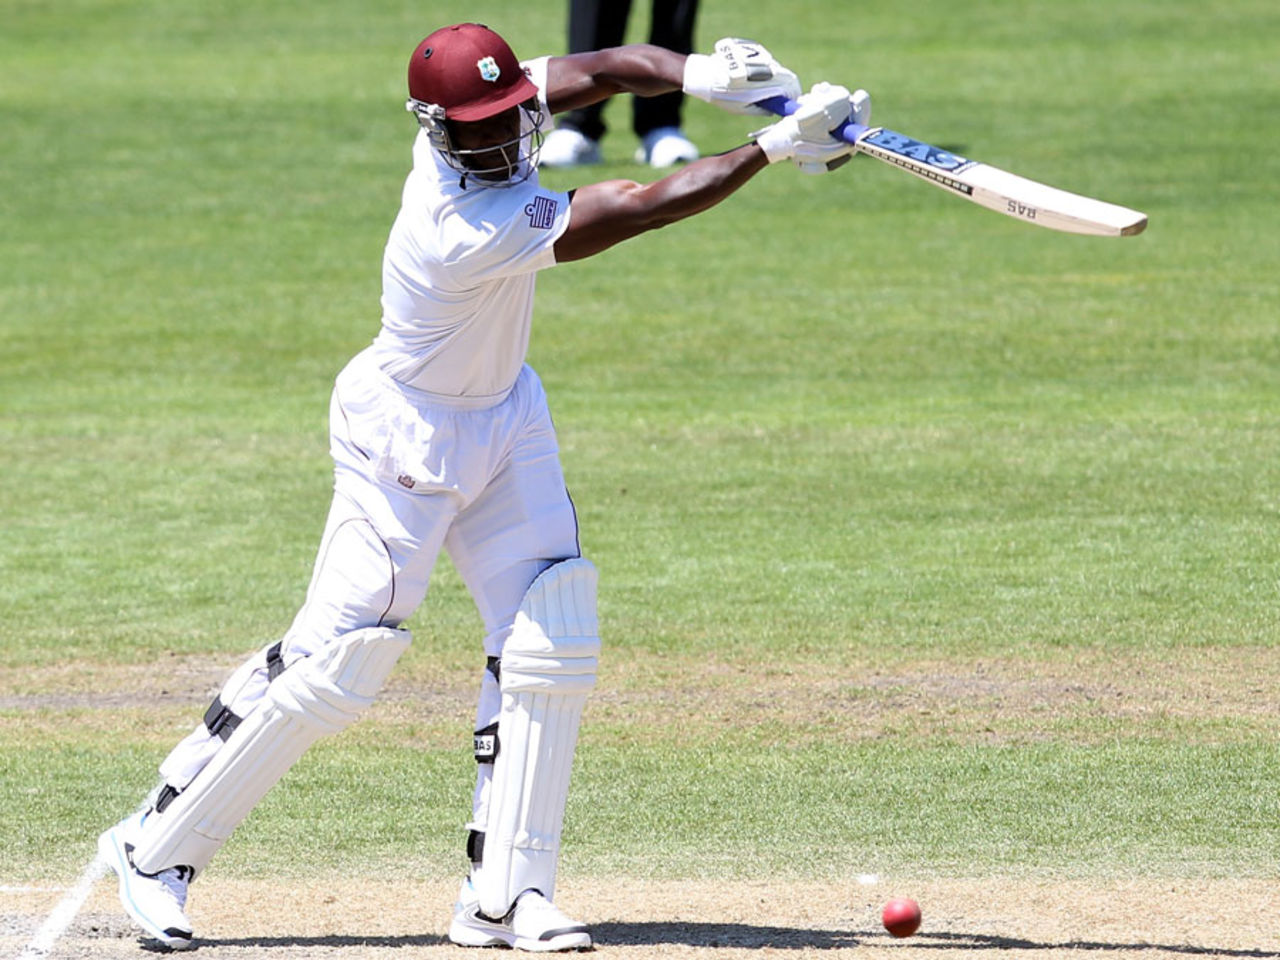 Darren Sammy looks to place one on the off side, New Zealand v West Indies, 1st Test, Dunedin, 3rd day, December 5, 2013